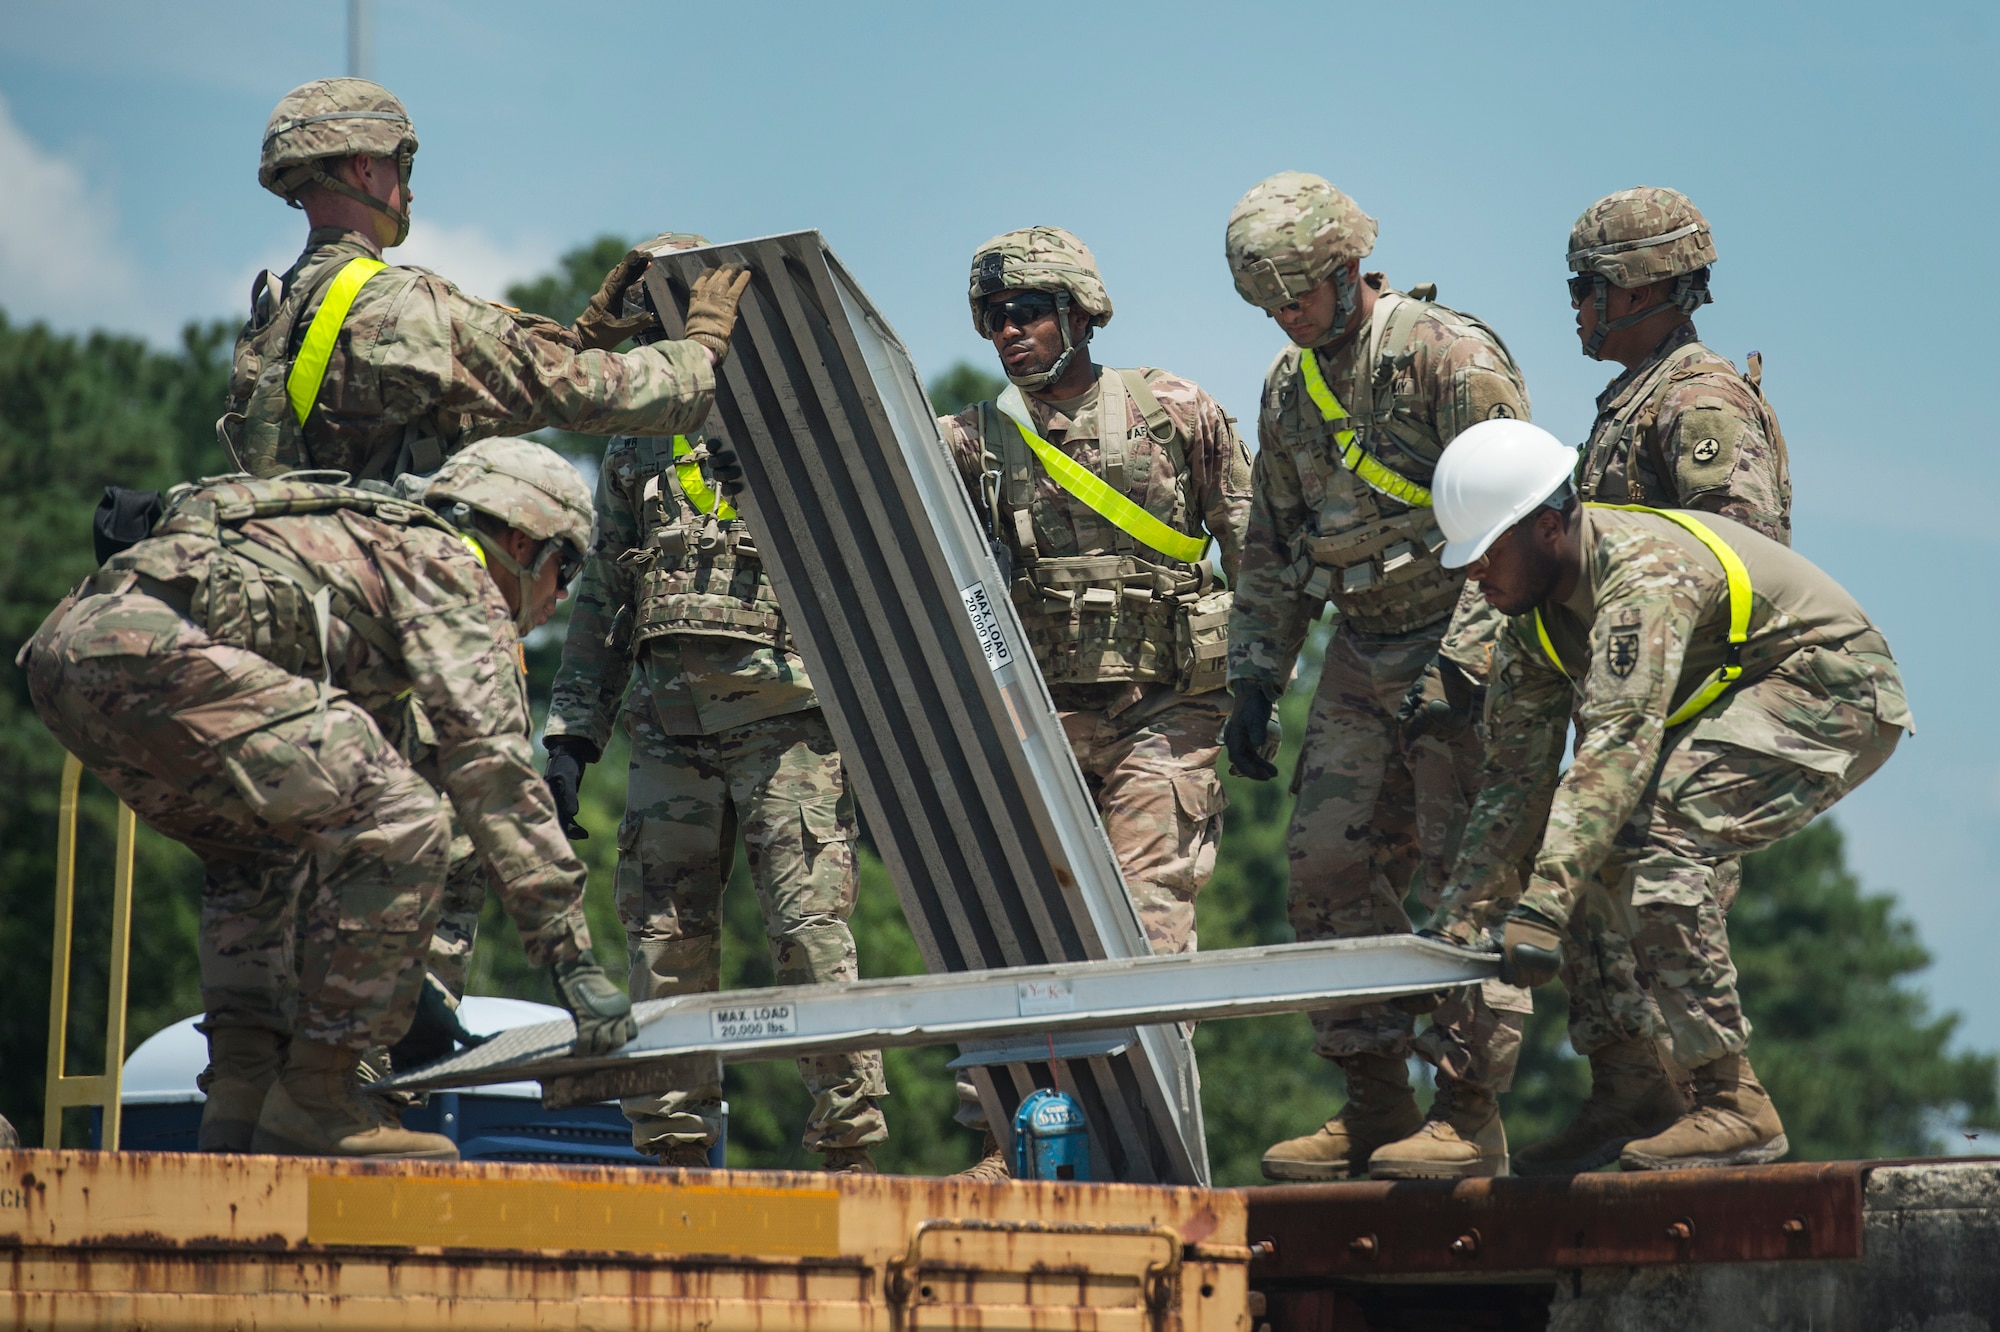 U.S. Army Soldiers from Fort Bragg, N.C., move equipment to prepare a rail system before receiving military vehicles as part of Exercise Dragon Lifeline Aug. 7, 2019, at Joint Base Charleston’s Naval Weapons Station, S.C. The exercise provided military personnel with experience needed to support rapid deployment operations across air, land, rail and sea. JB Charleston helps to provide rapid global deployment of personnel and equipment to deployed locations across the globe. The annual exercise is just one of the critical readiness exercises the DOD conducts to maintain a lethal and ready force. (U.S. Air Force photo by Tech. Sgt. Christopher Hubenthal)